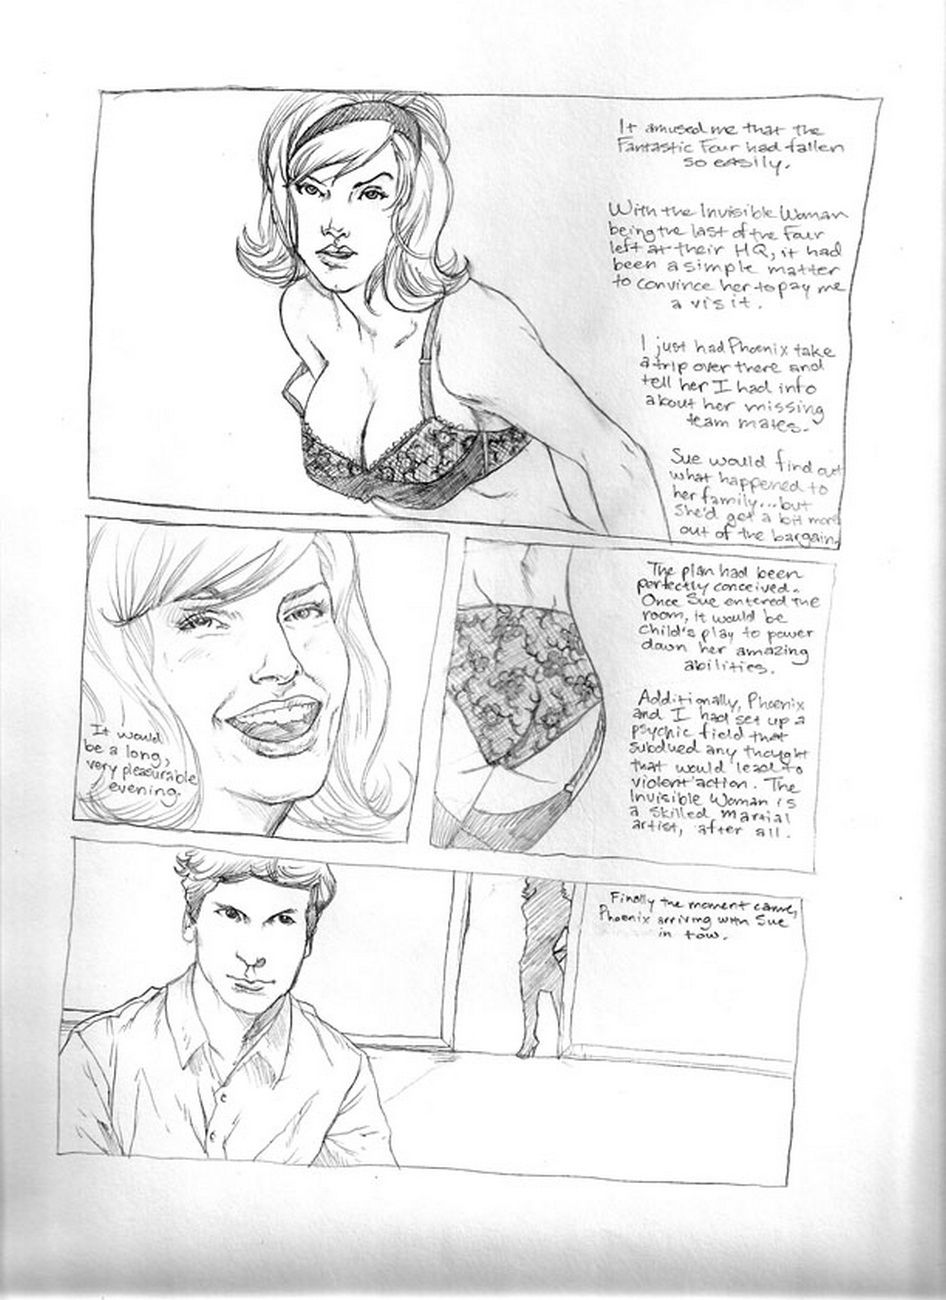 Submission Agenda 5 - The Invisible Woman page 3